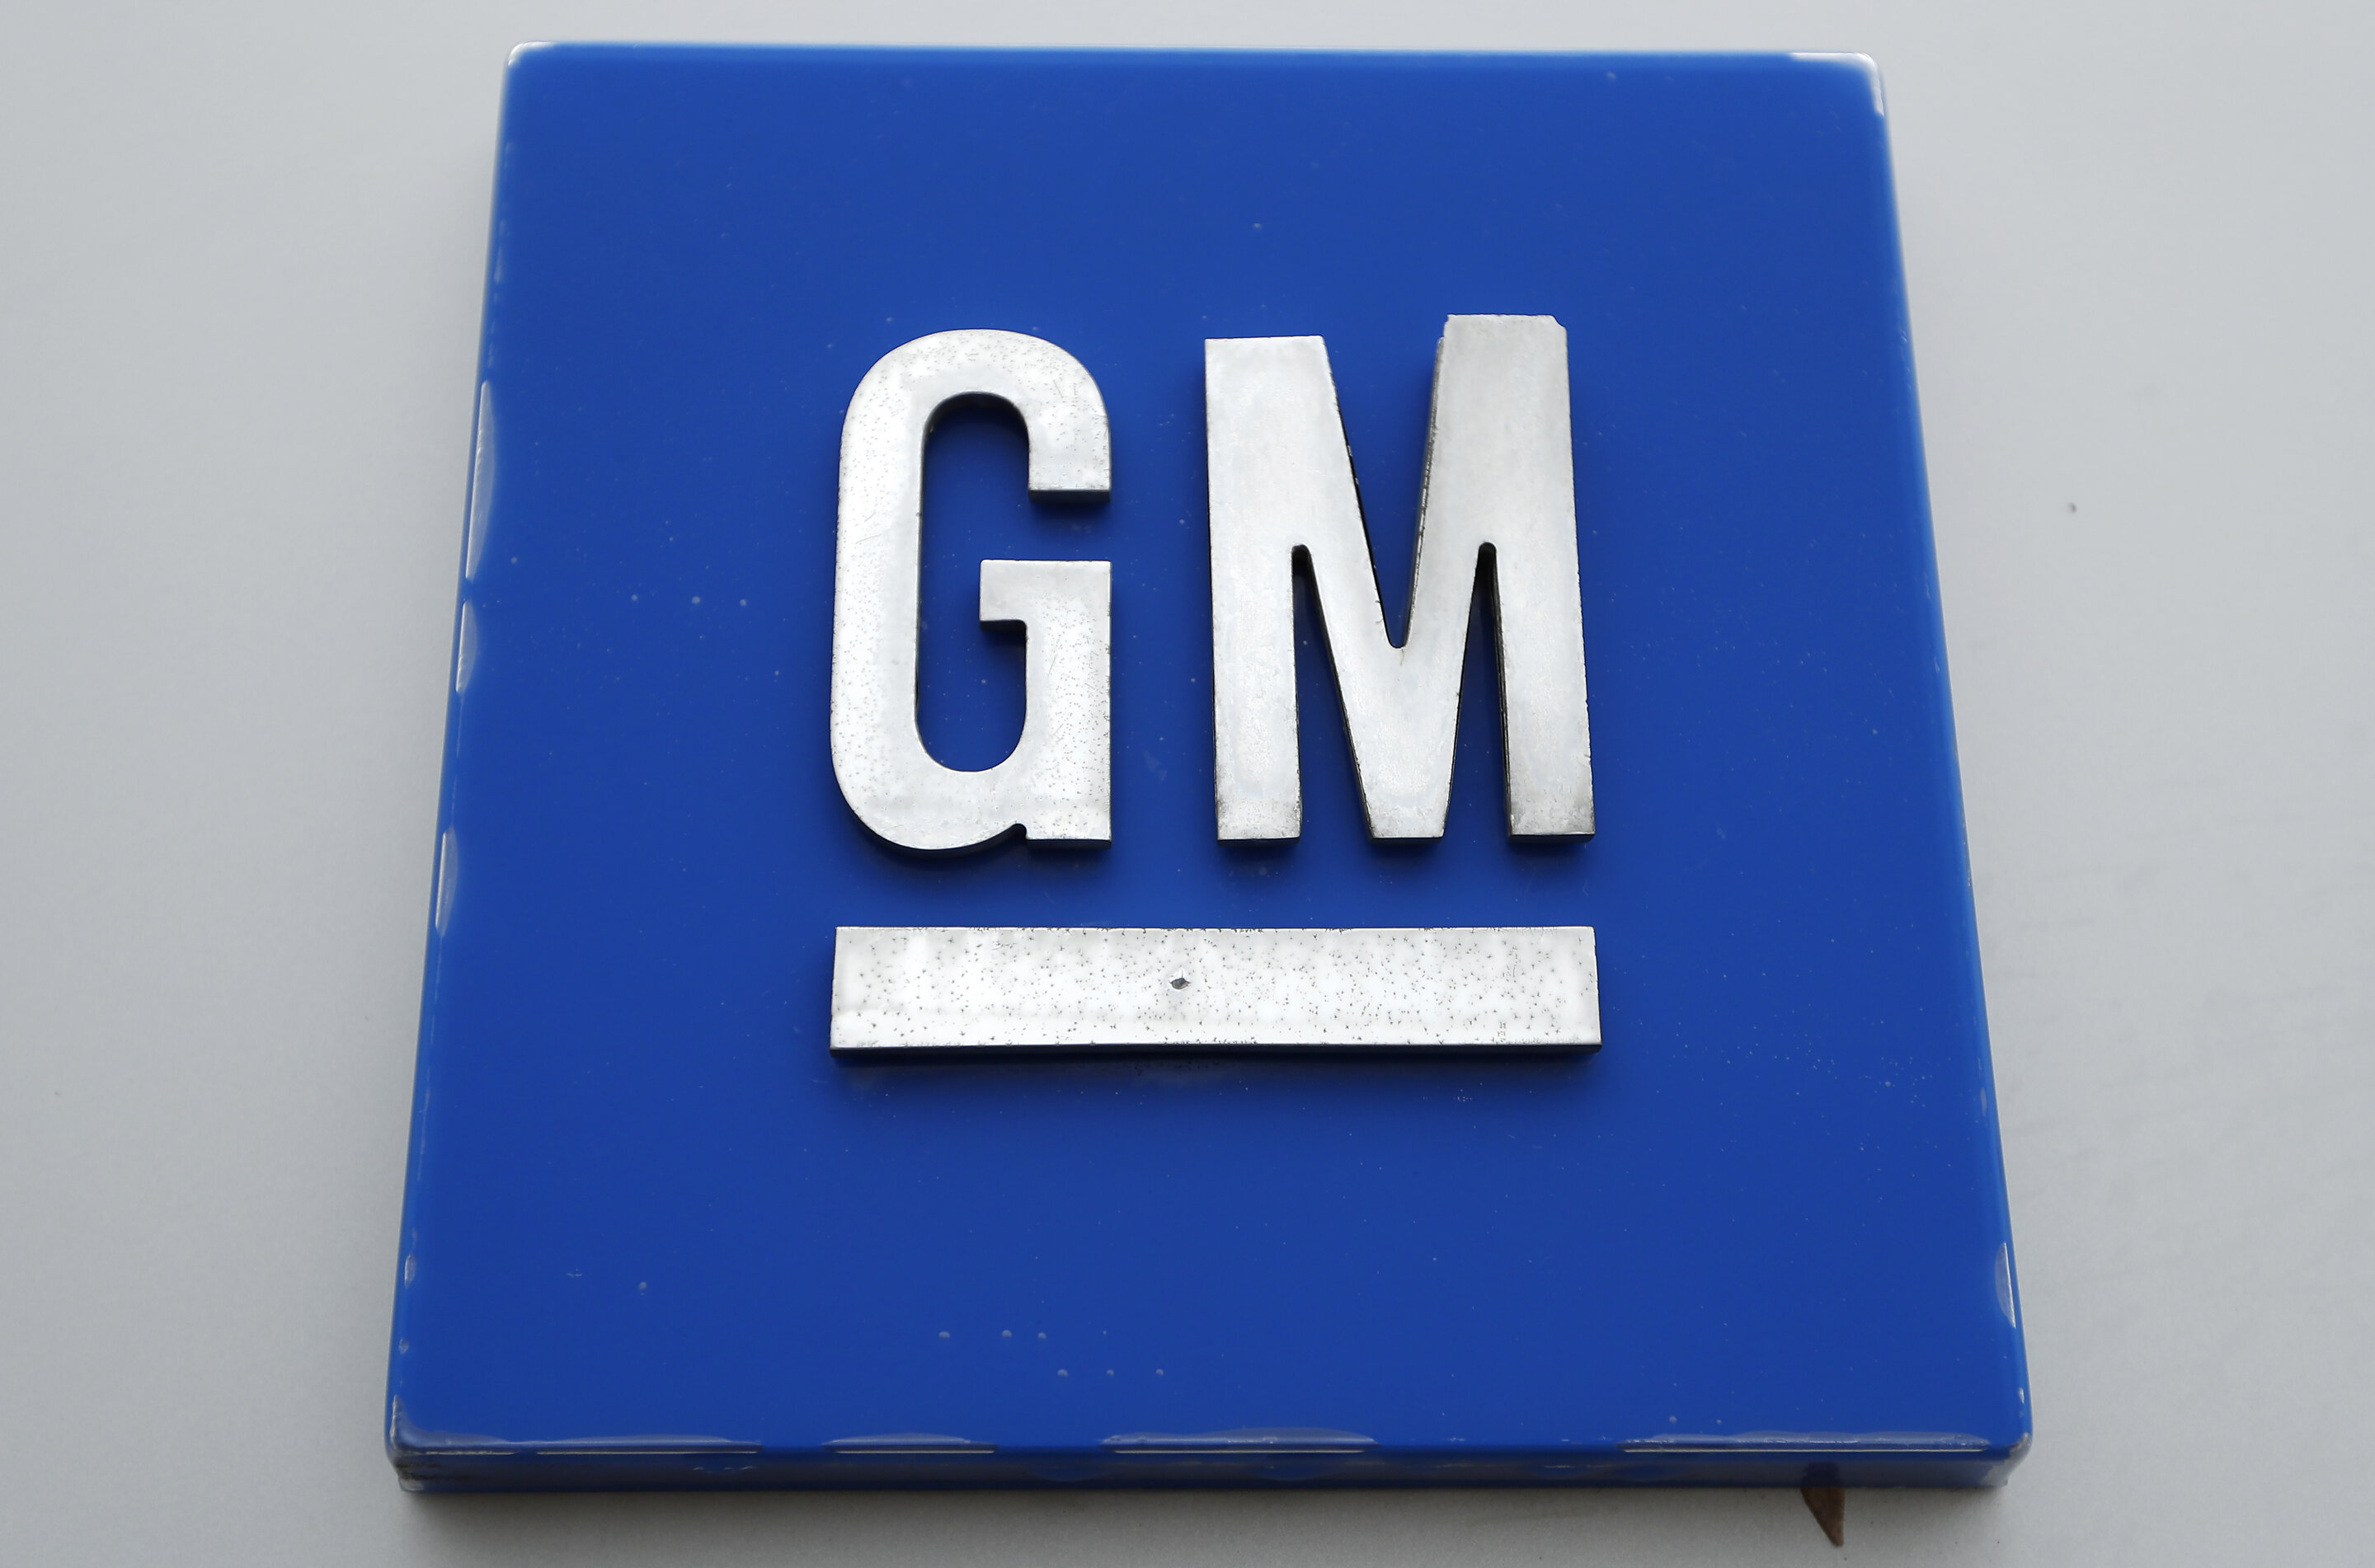 #Chip shortage forces GM to pause production at Indiana plant